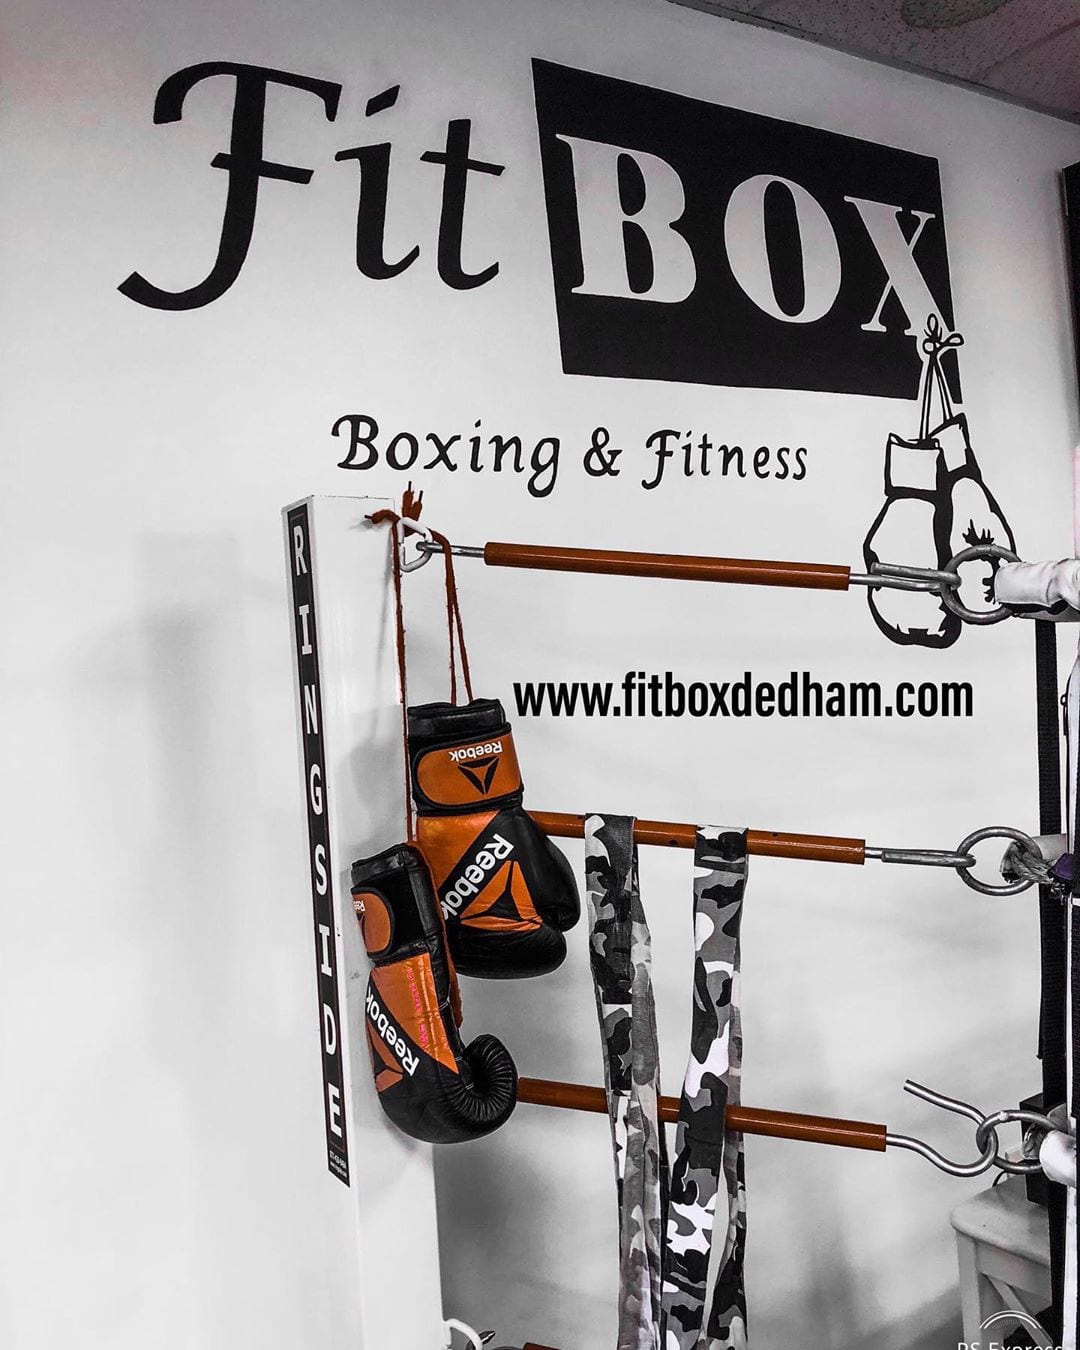 Free trial sign-up at (781)727-9503 or Fitbox@outlook.com . #boxing #studio #boxingtraining #boxinglessons #boxingworkout #boxingtrainer @tommymcinerney #workoutmotivation #workout #fight #fit #exercise @reebok #reebokboston #cardio #conditioning #hiitworkout #fitness #dedham #legacyplace #boston #nhl #boxer #box #sweetscience